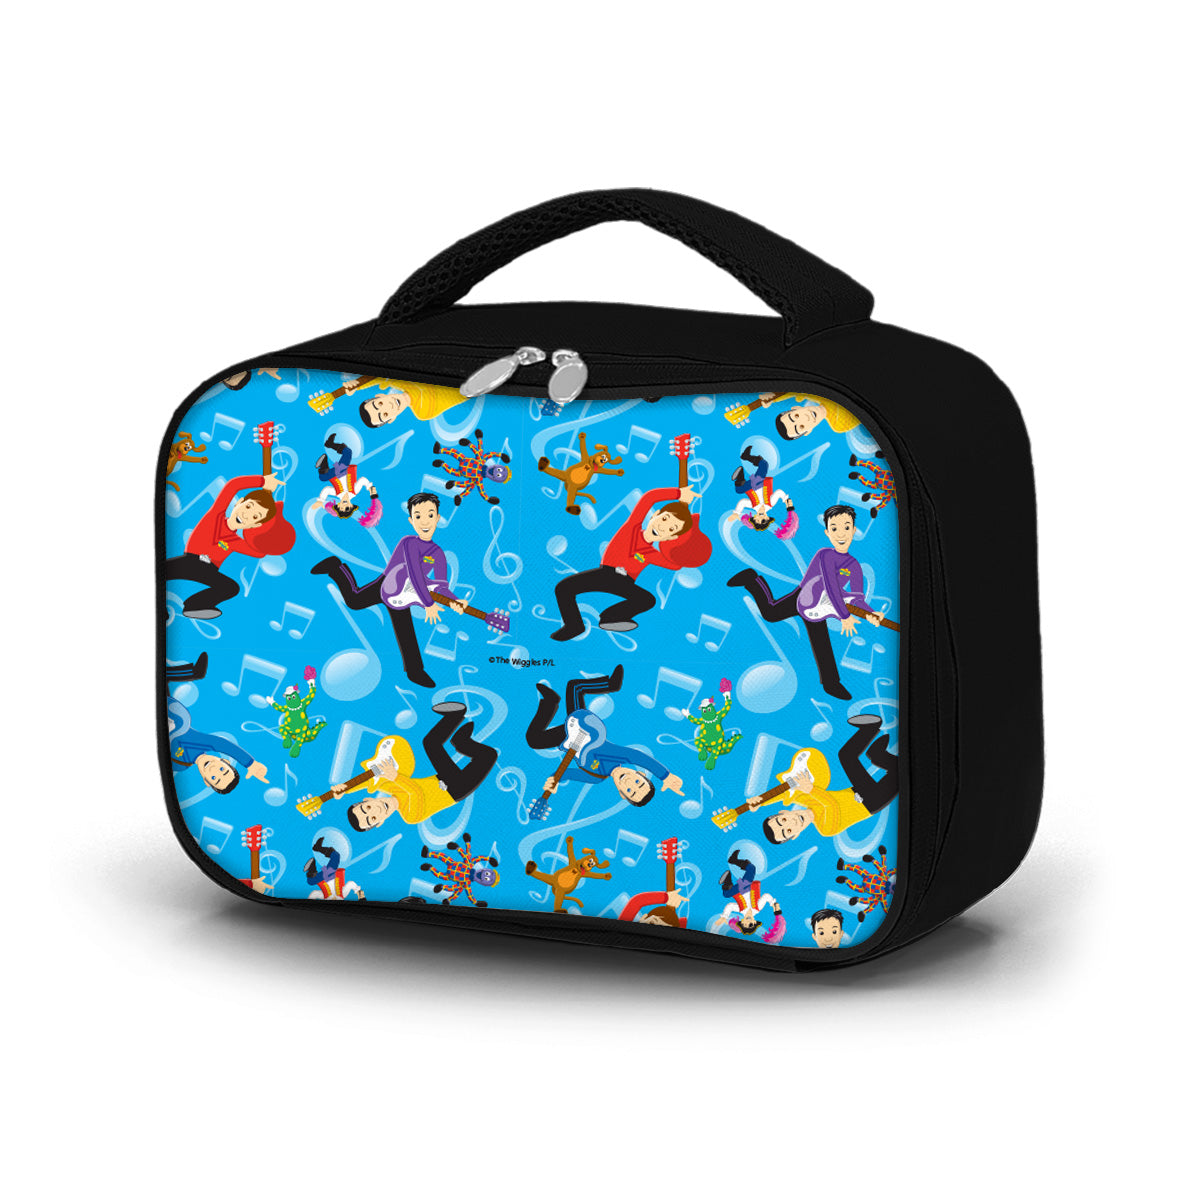 The Wiggles Original Music Lunch Cooler